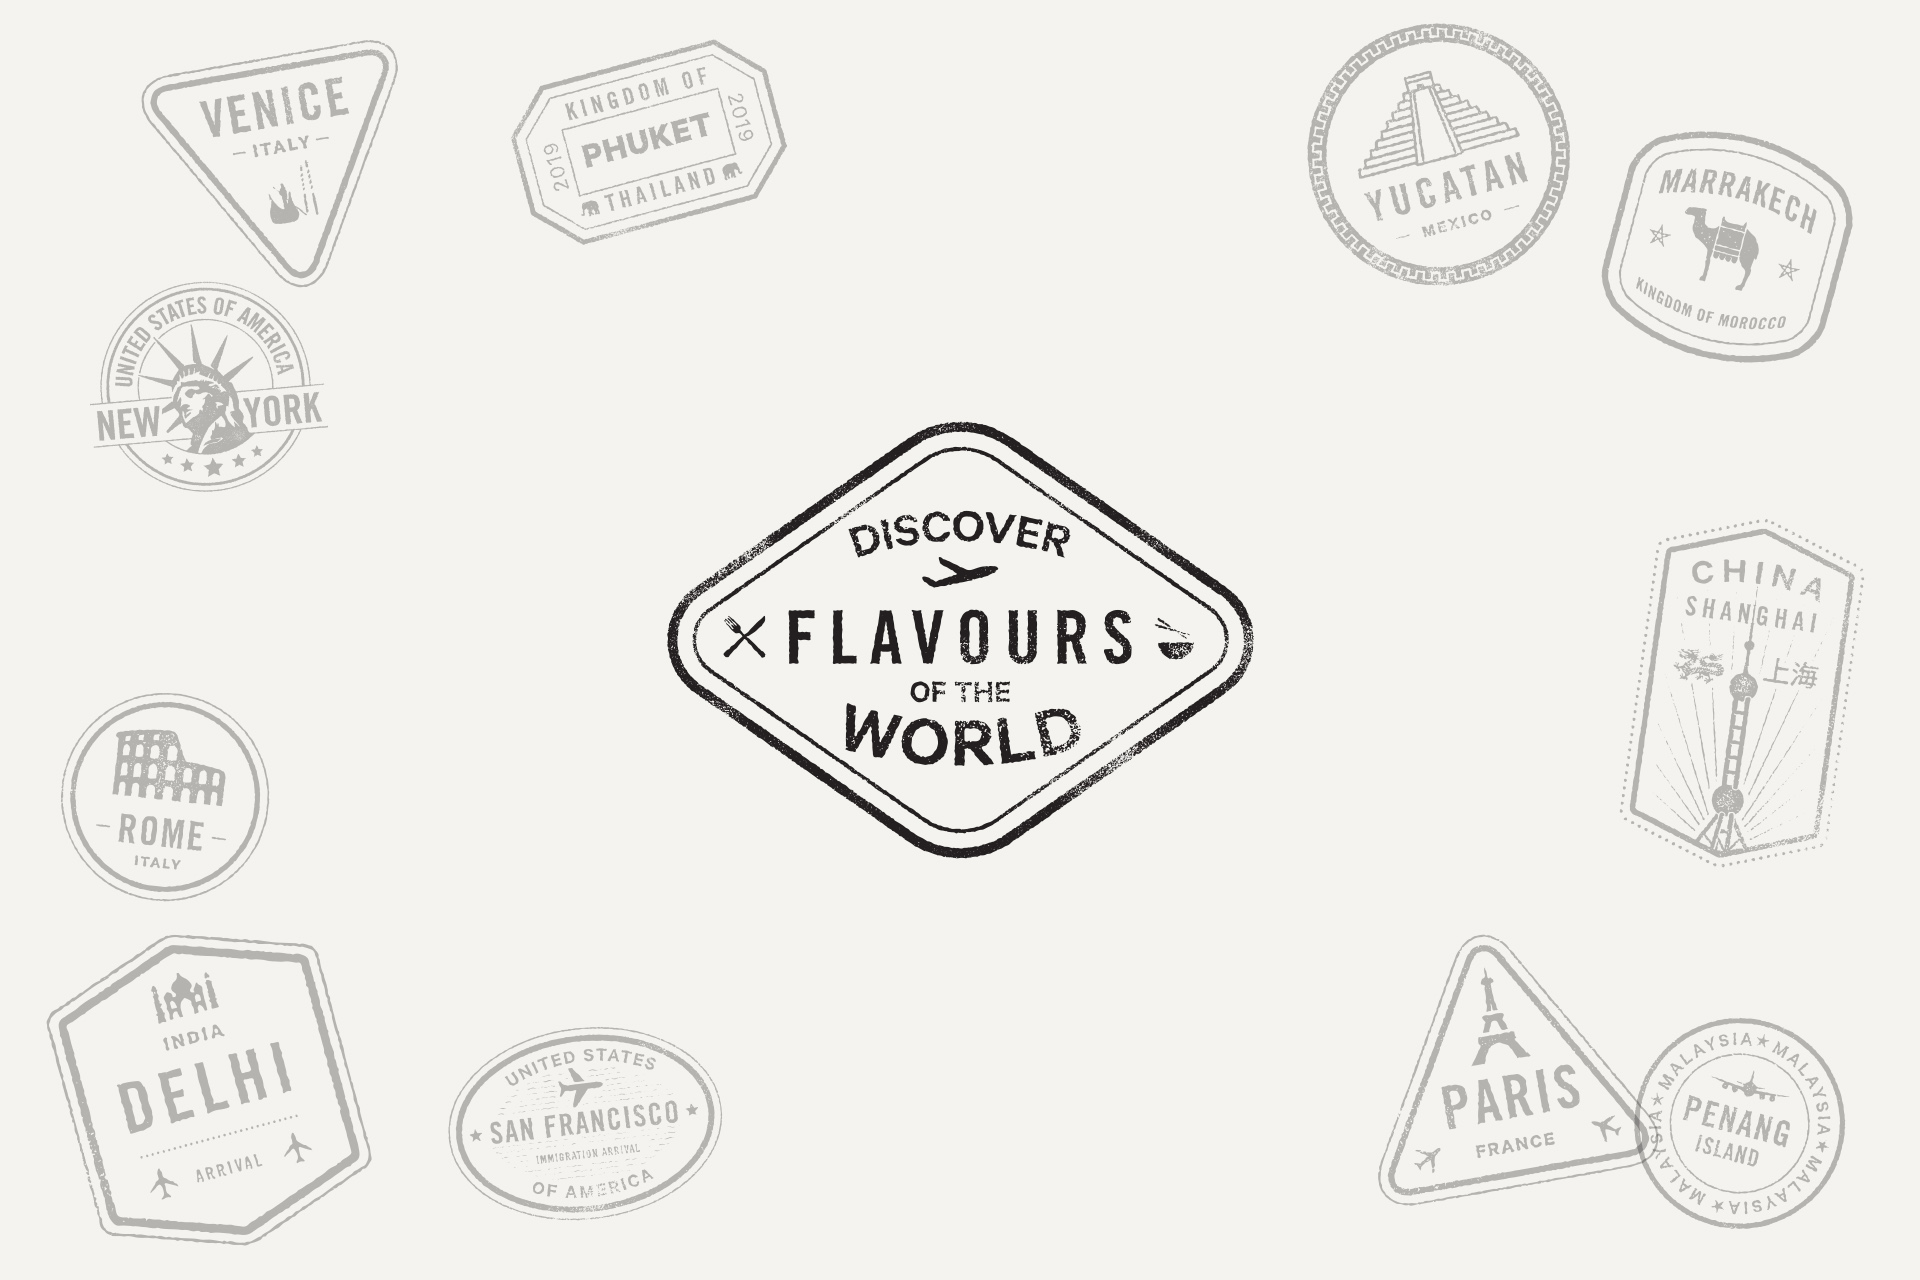 NW-Flavours-of-the-world-logo-black